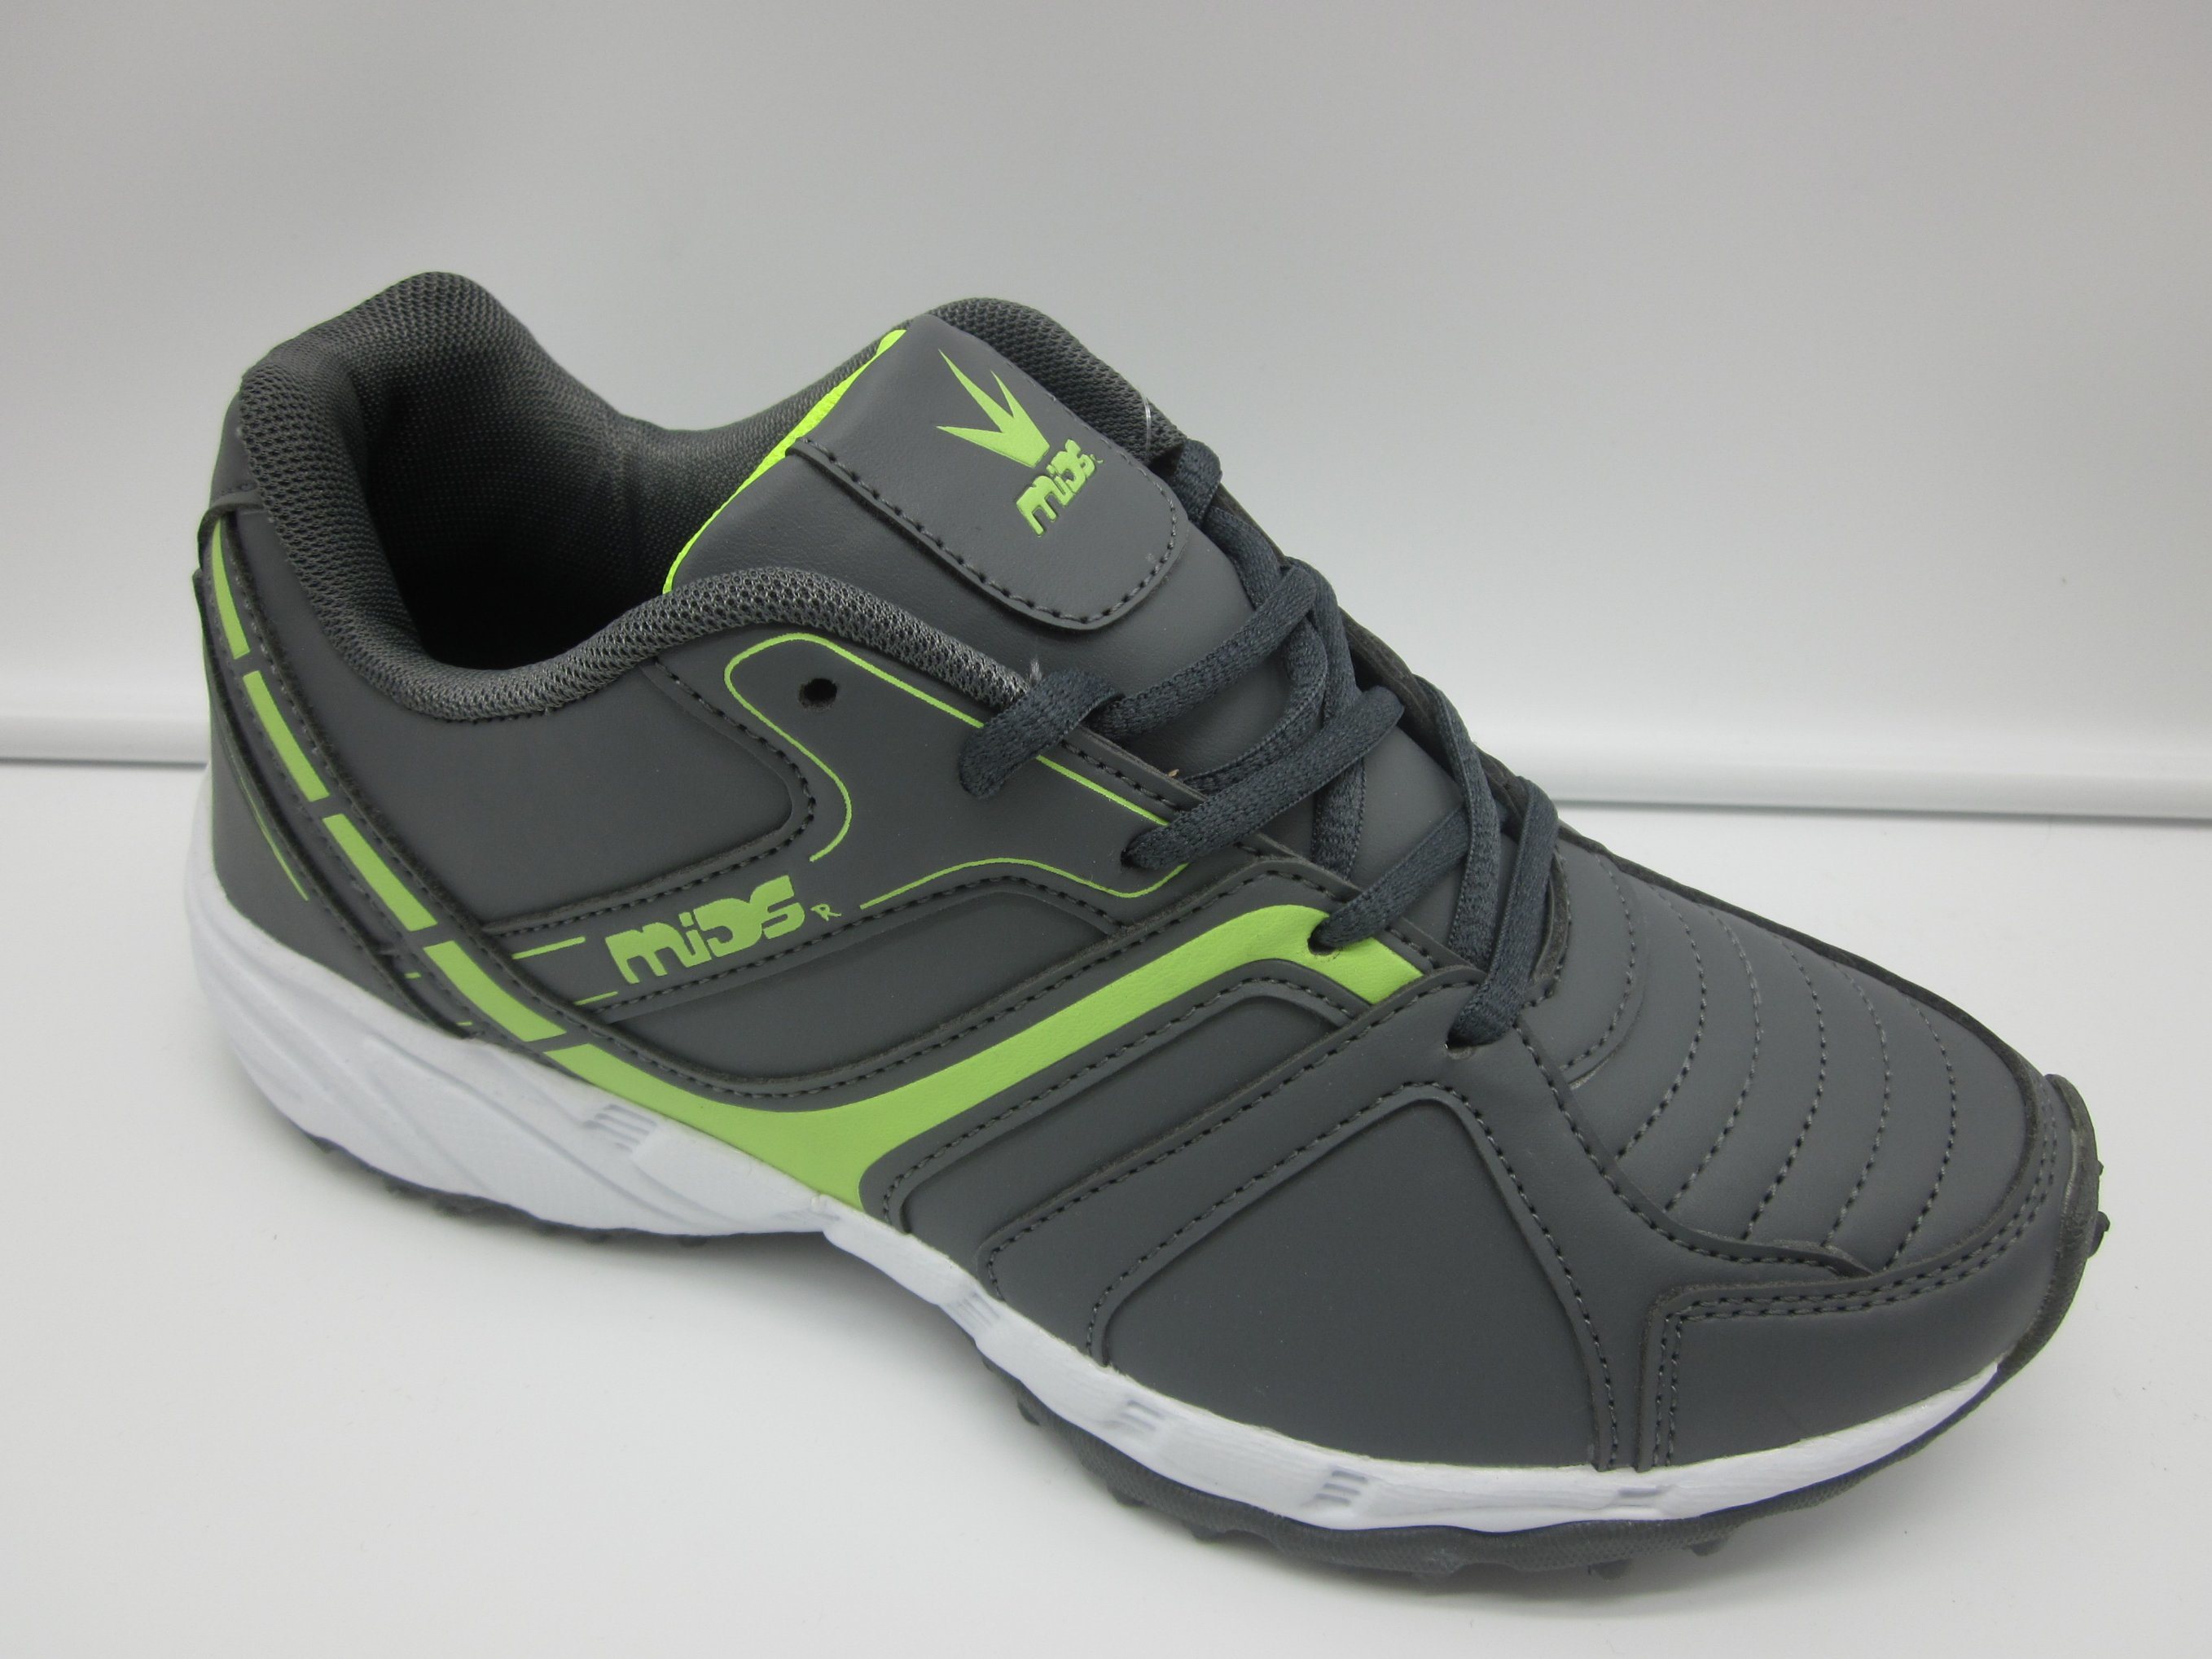 Athletic Functional Shoes Cricket Baseball Shoes with Men